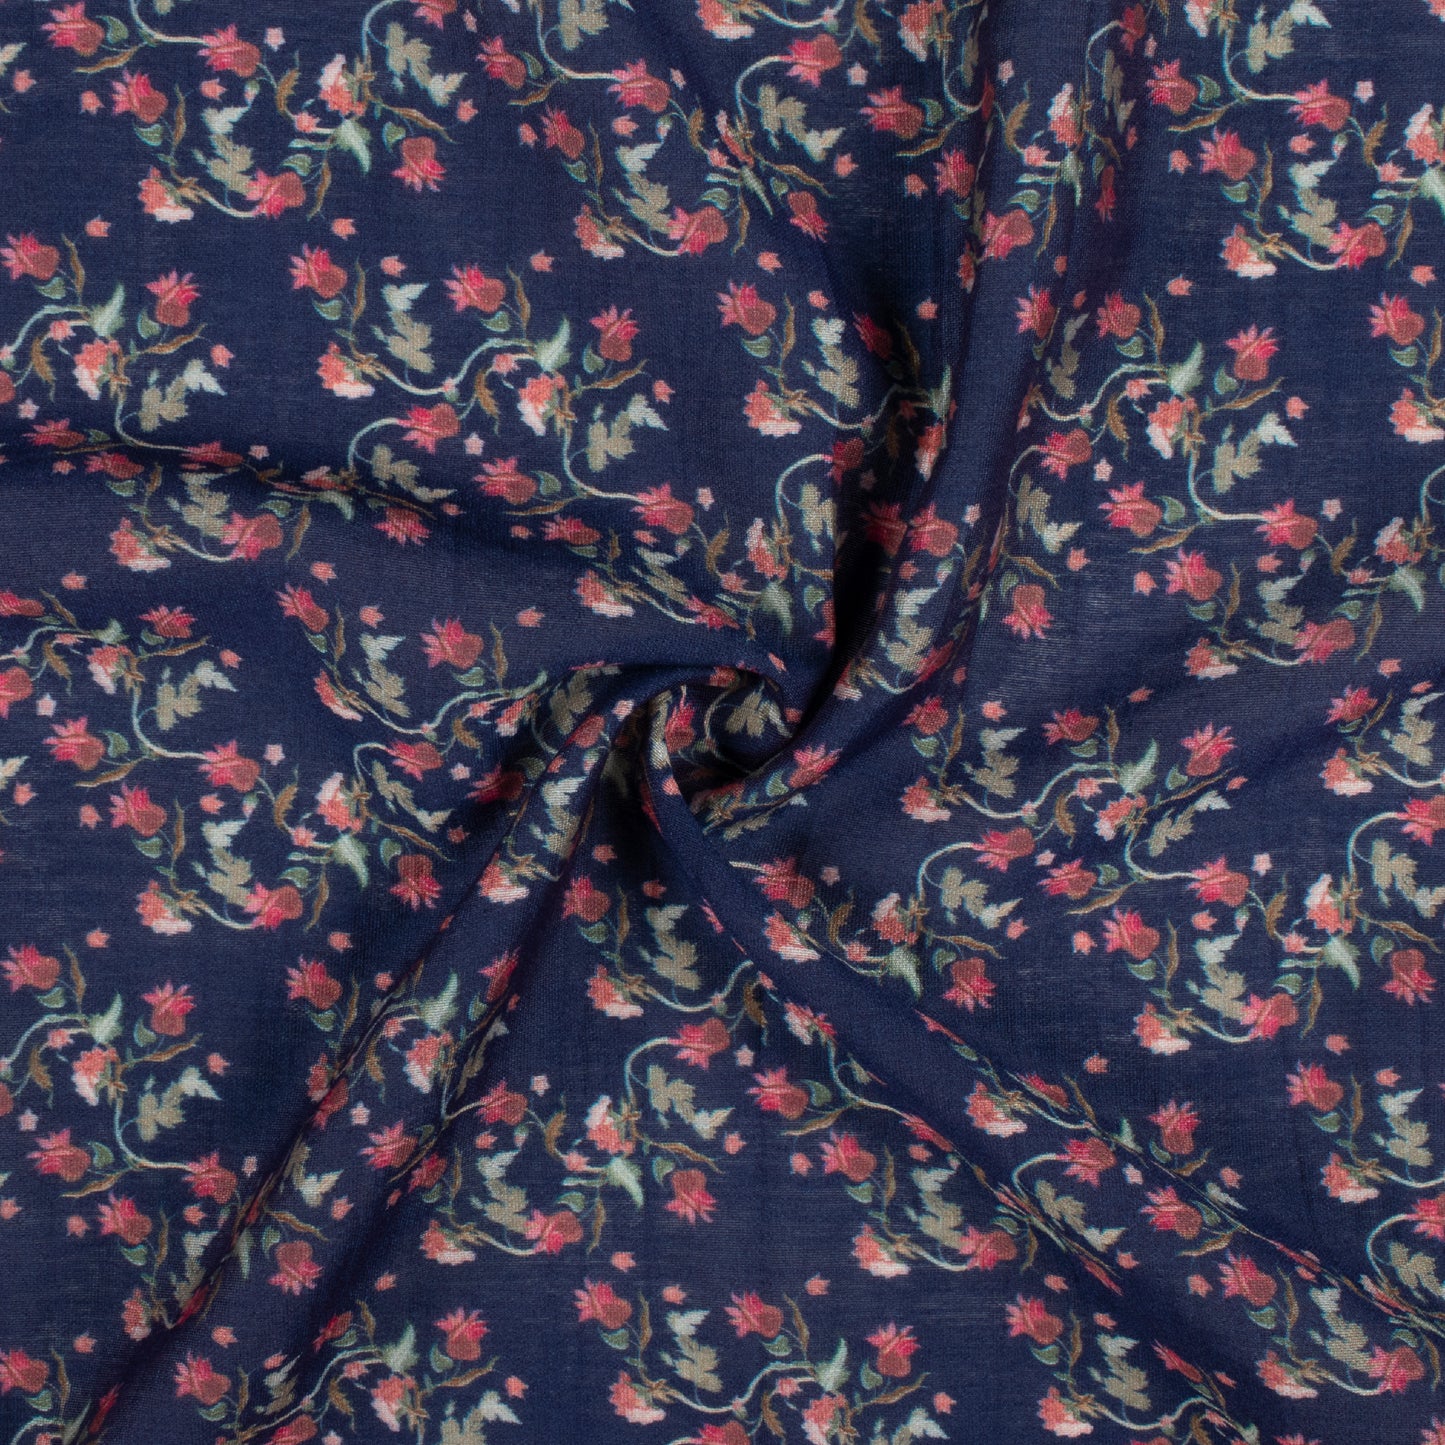 Space Blue And Taffy Pink Floral Pattern Digital Print Viscose Chanderi Fabric